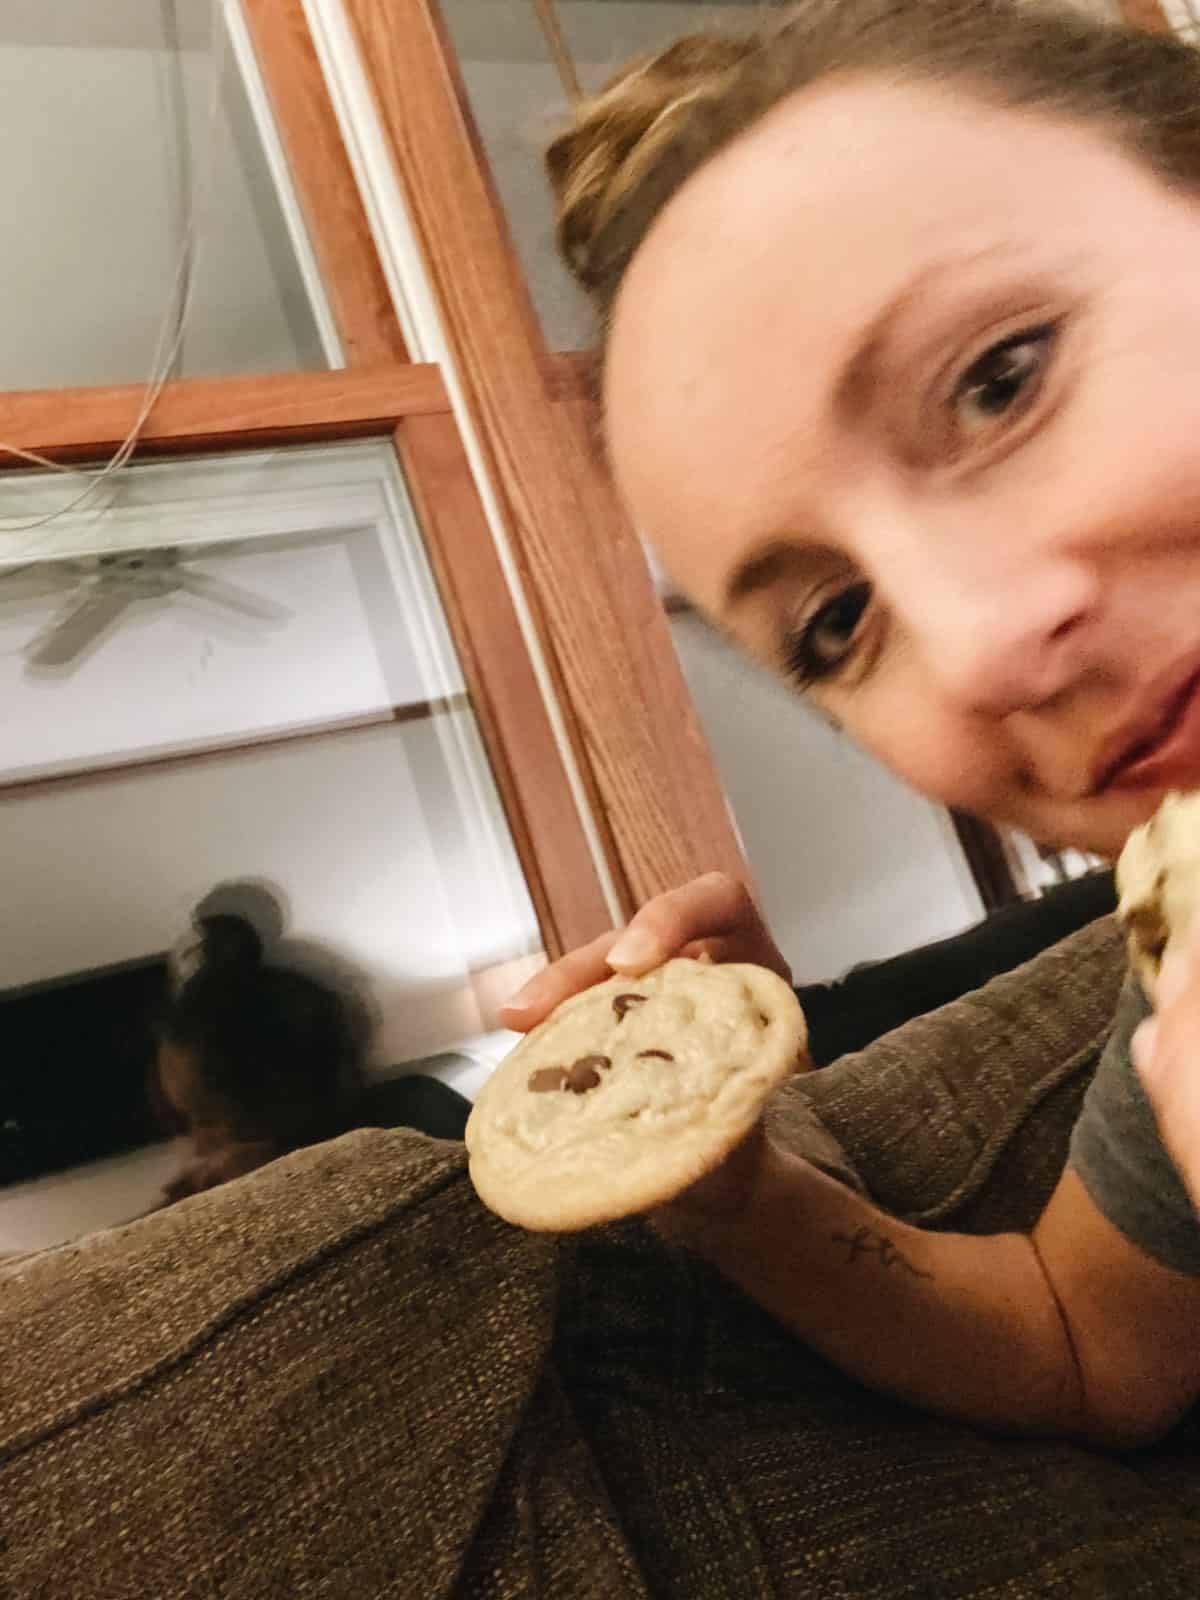 Lindsay holding a chocolate chip cookie.